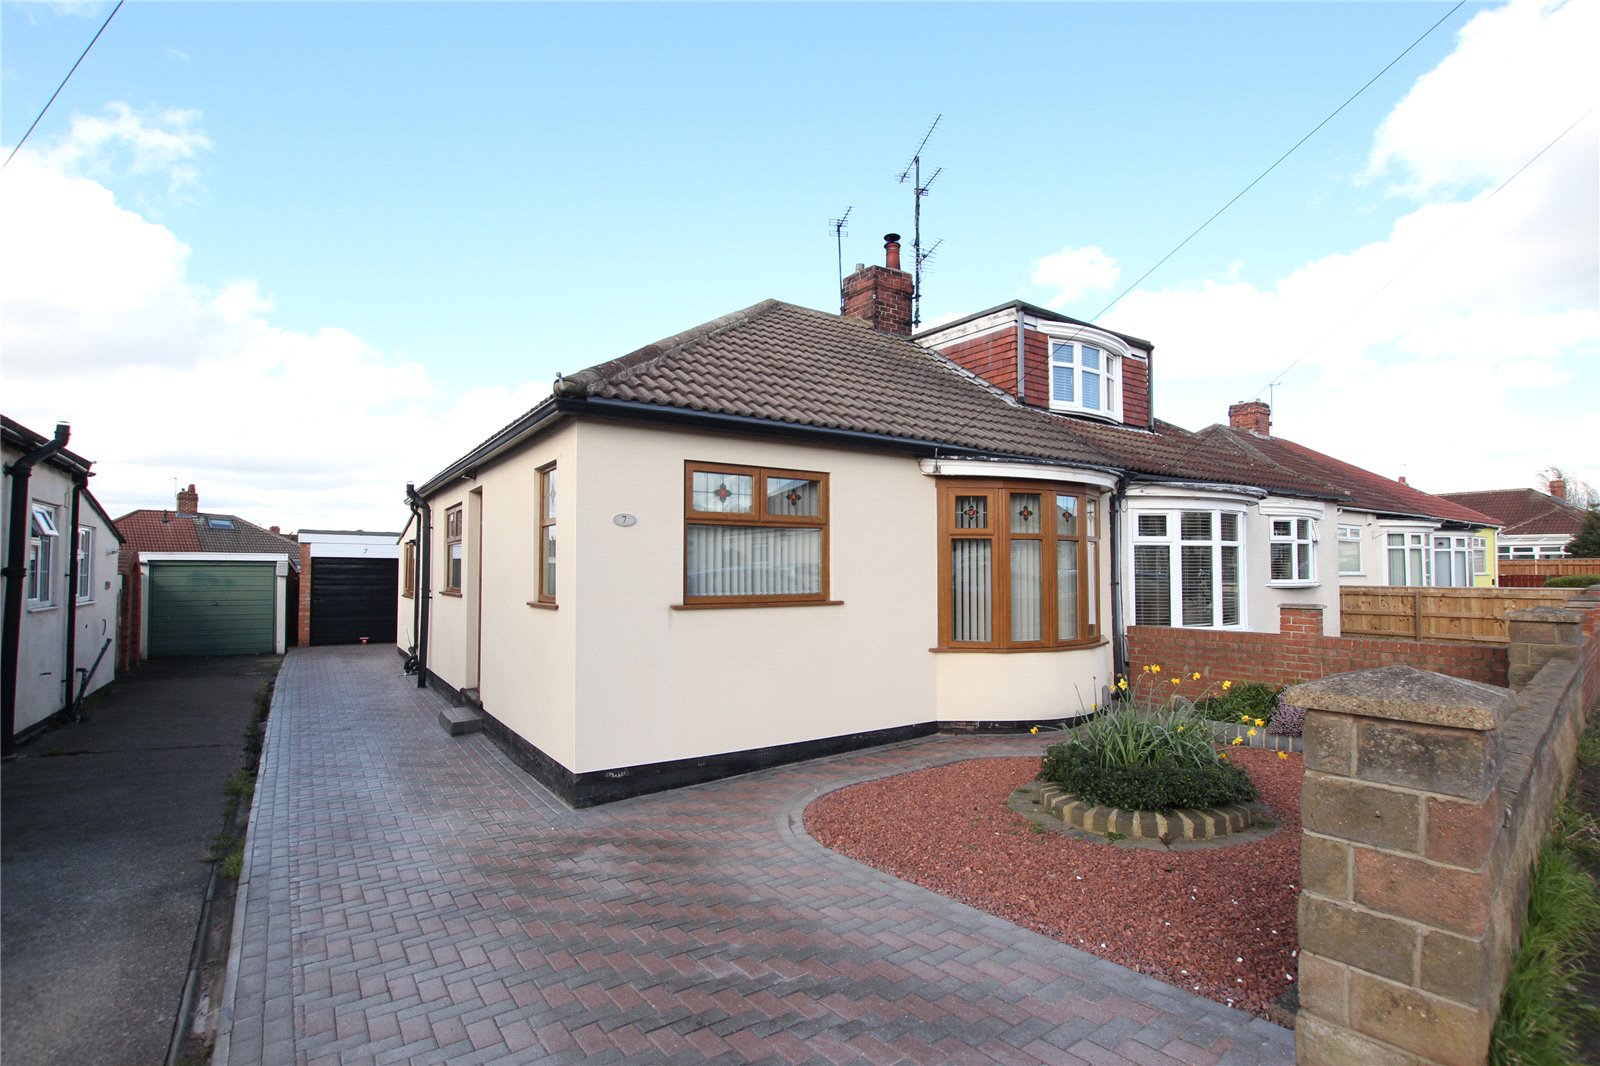 3 bed bungalow for sale in Somerville Avenue, Ormesby - Property Image 1